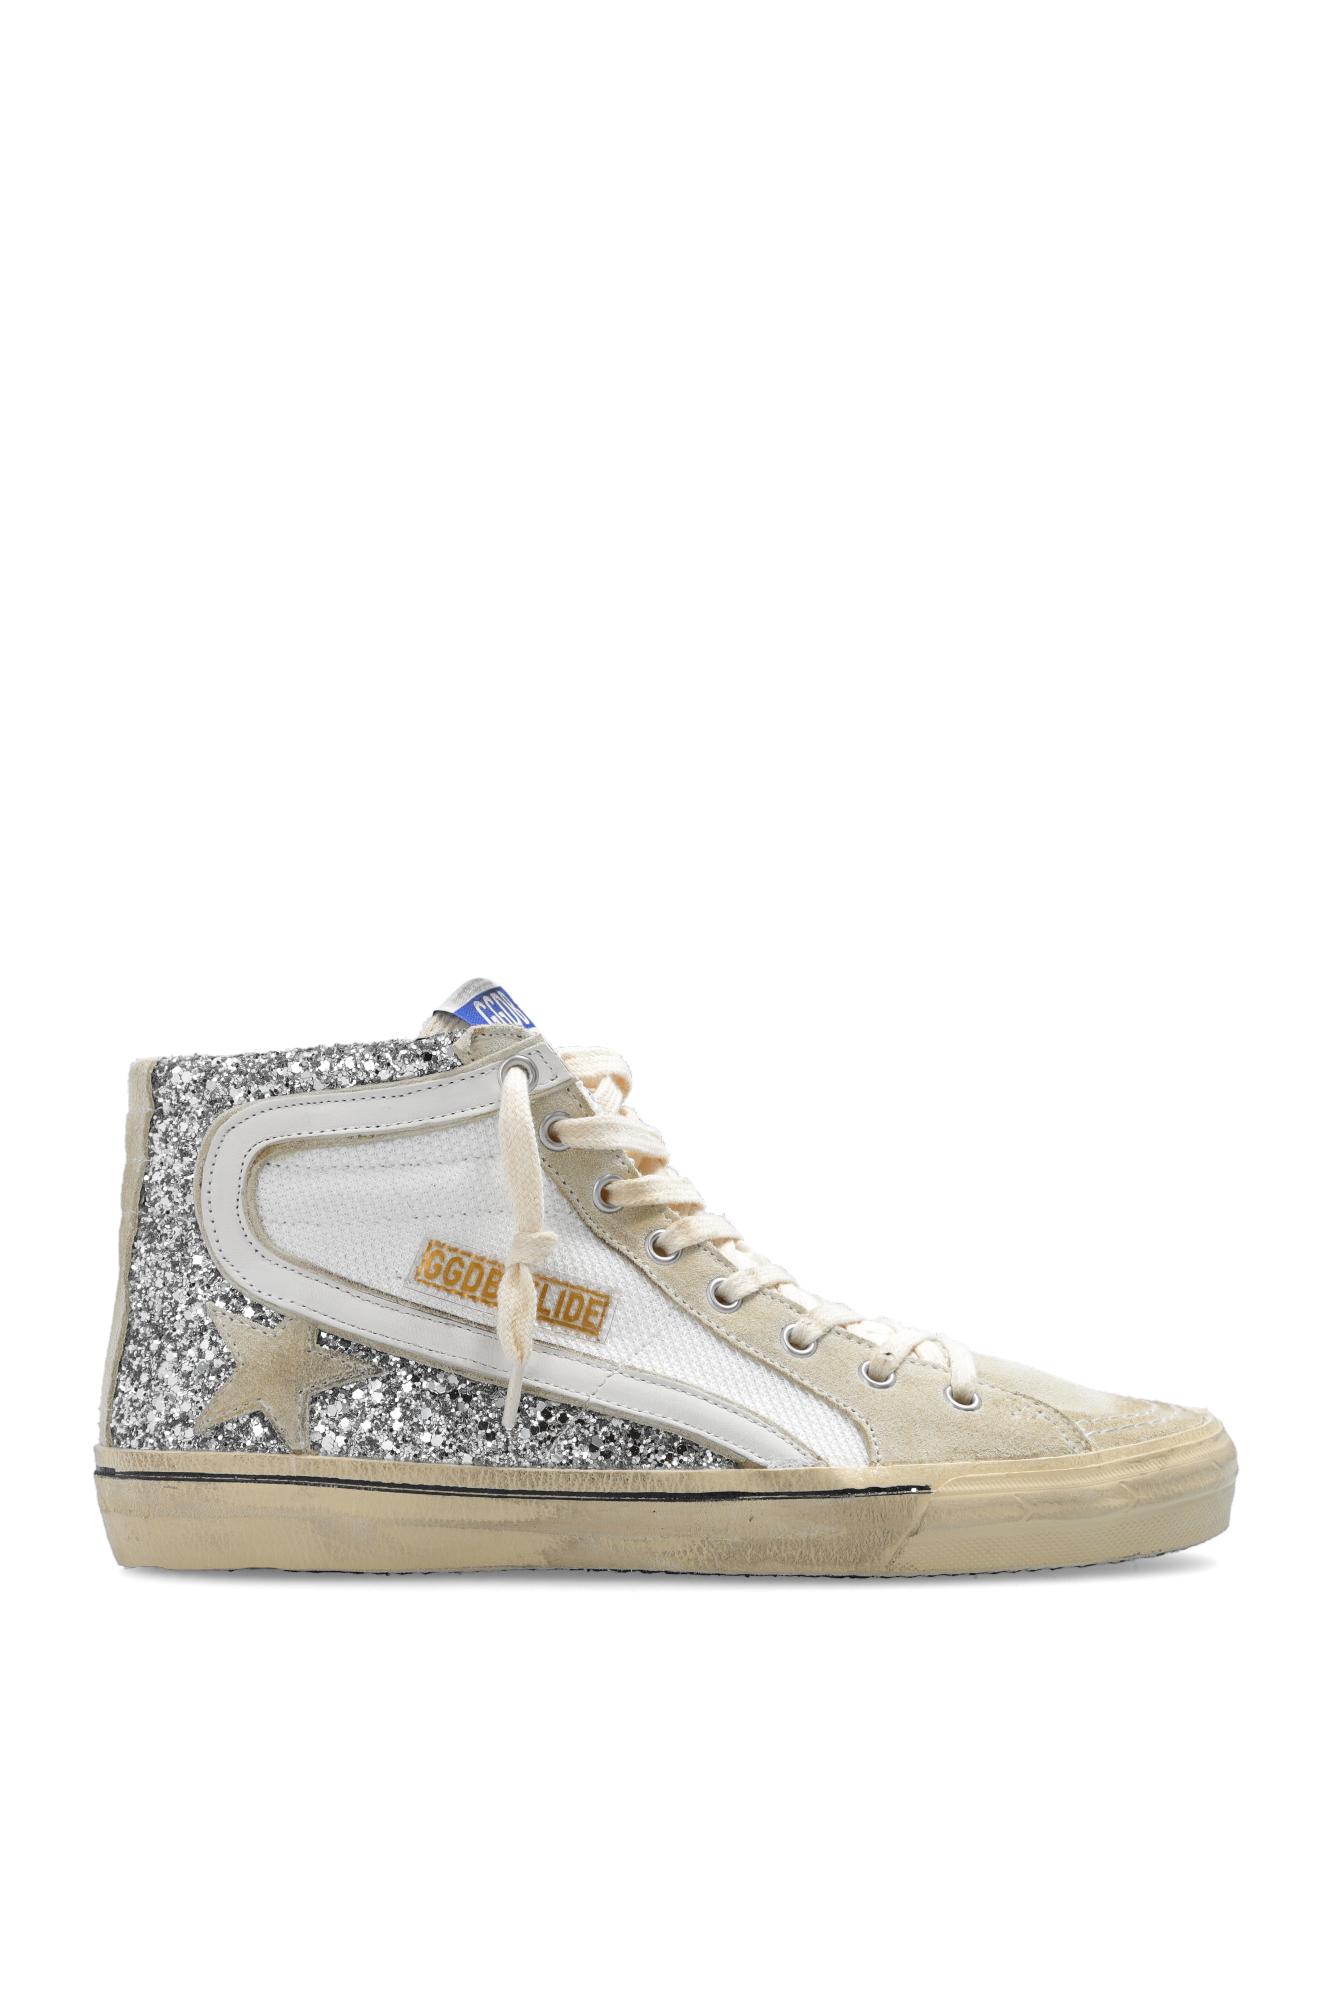 Golden Goose \'slide\' High-top Sneakers in White | Lyst